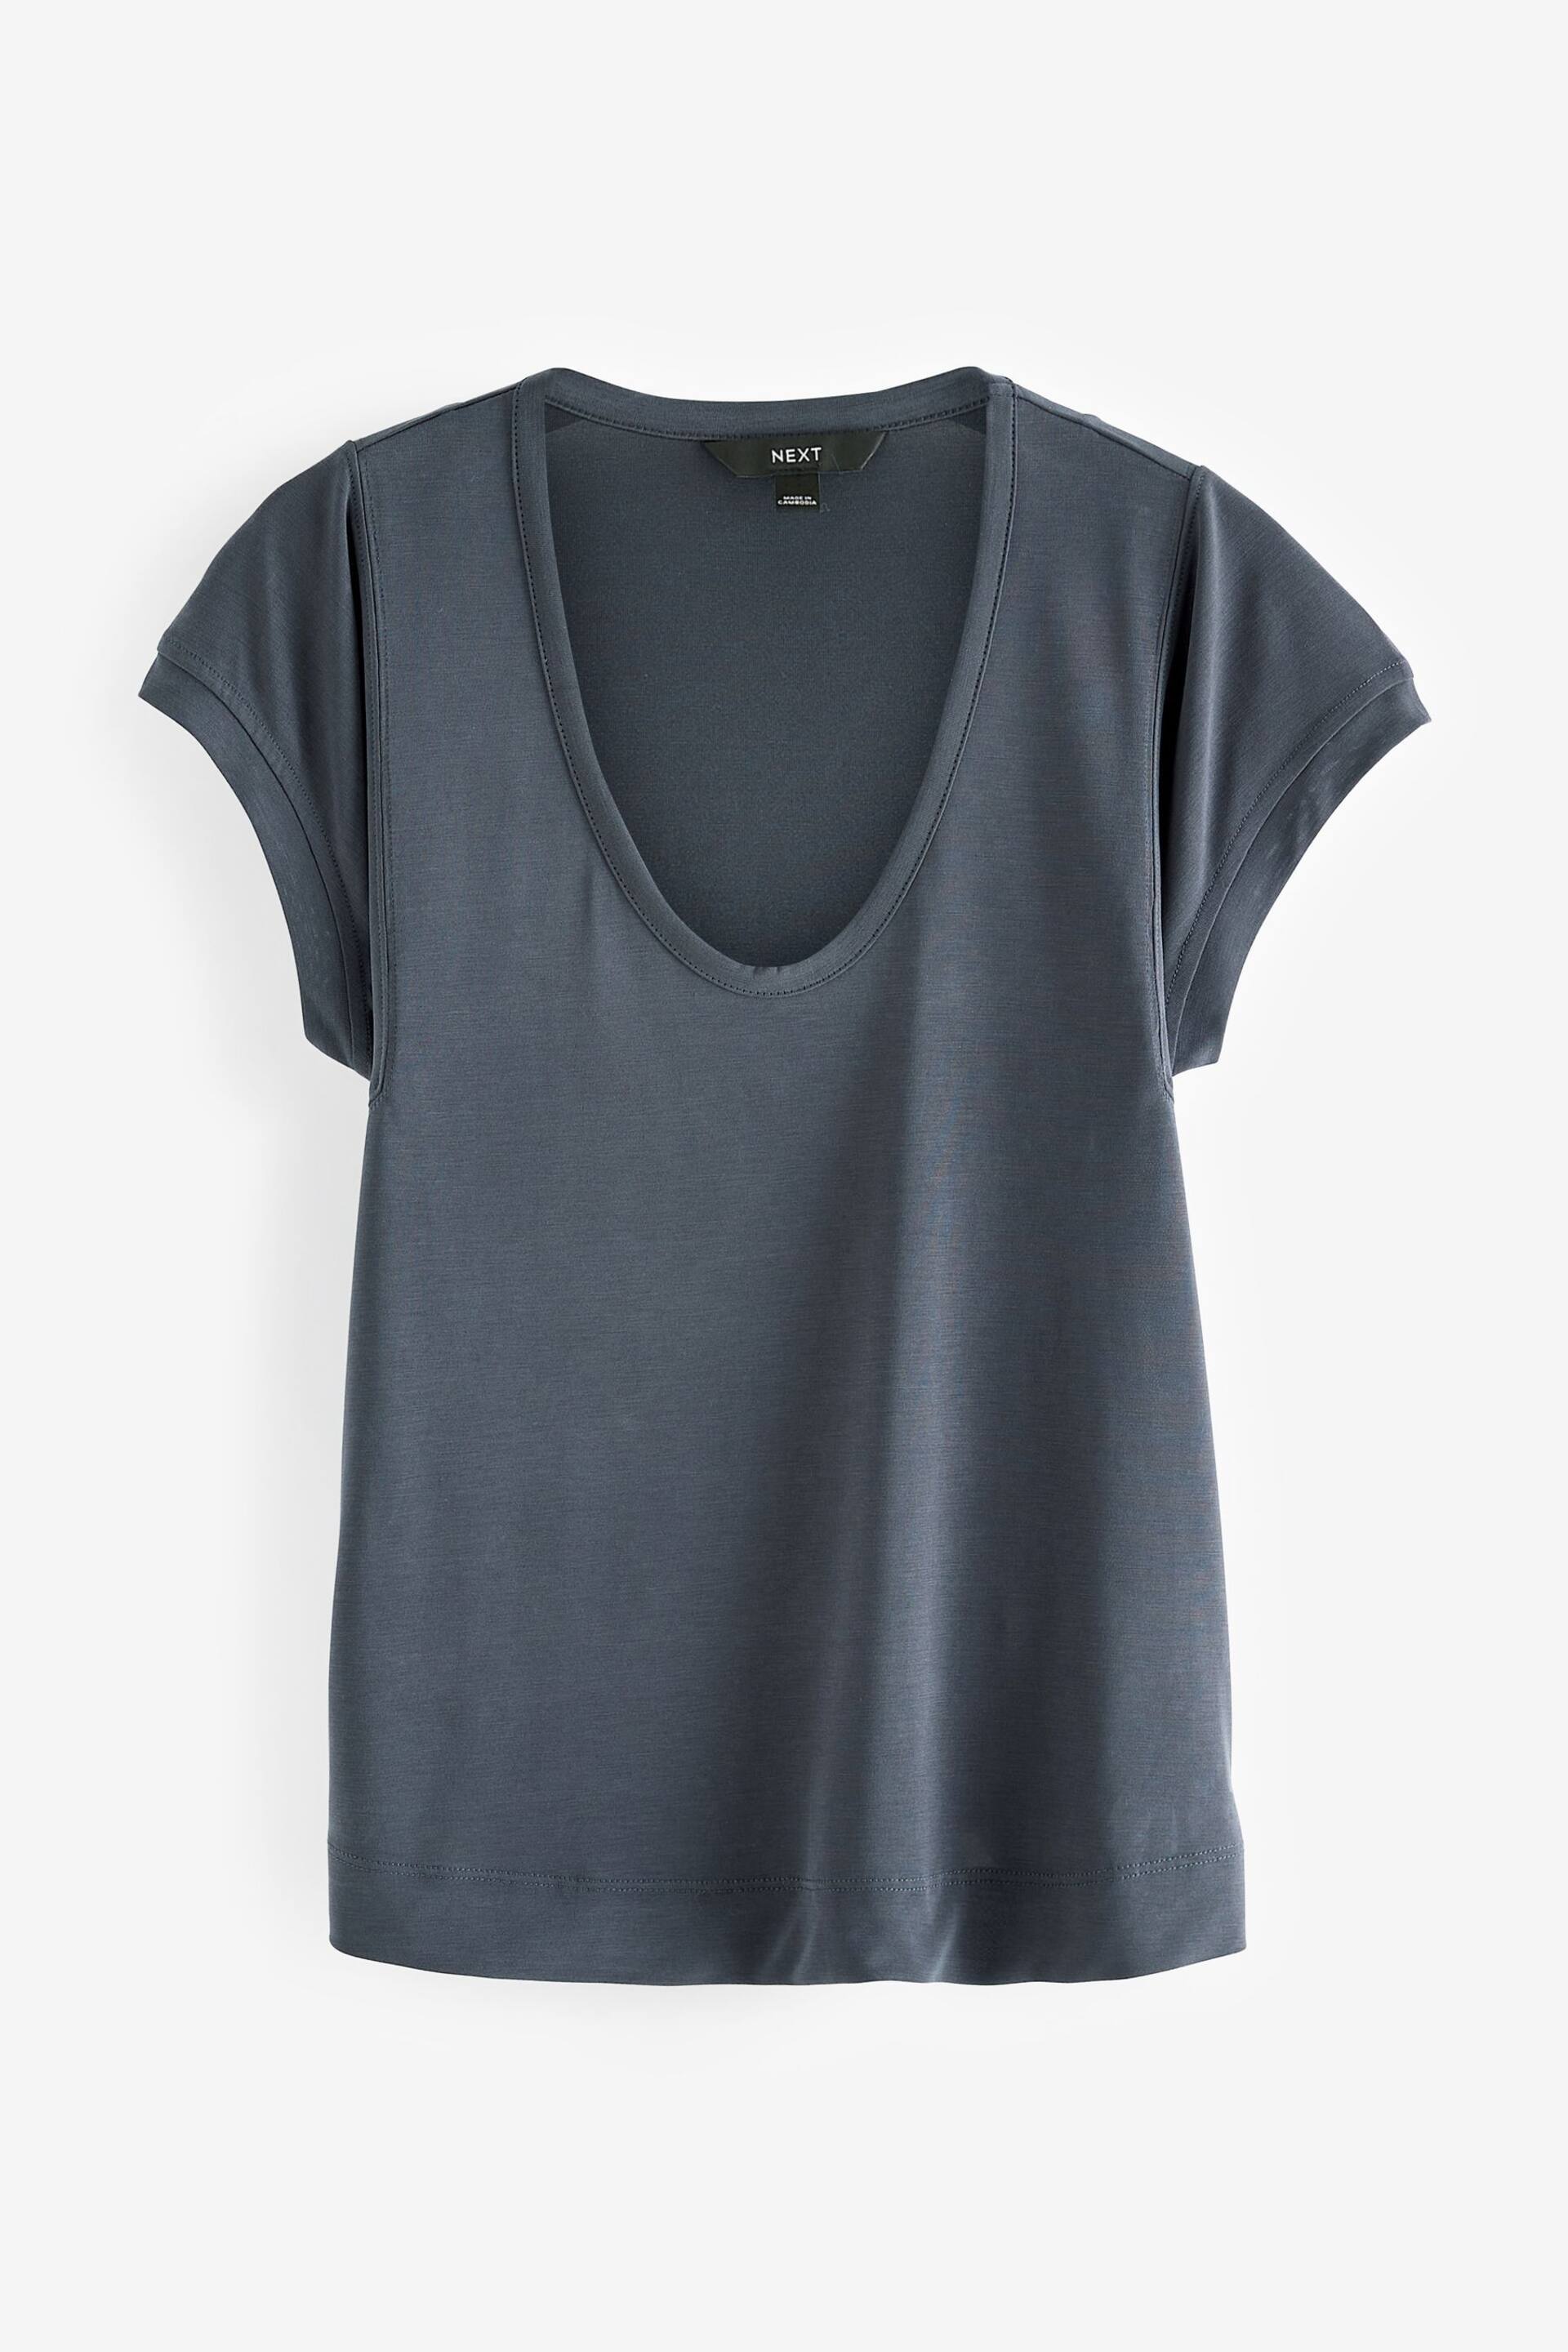 Charcoal Grey Premium Modal Rich Short Sleeve Scoop Neck T-Shirt - Image 1 of 2